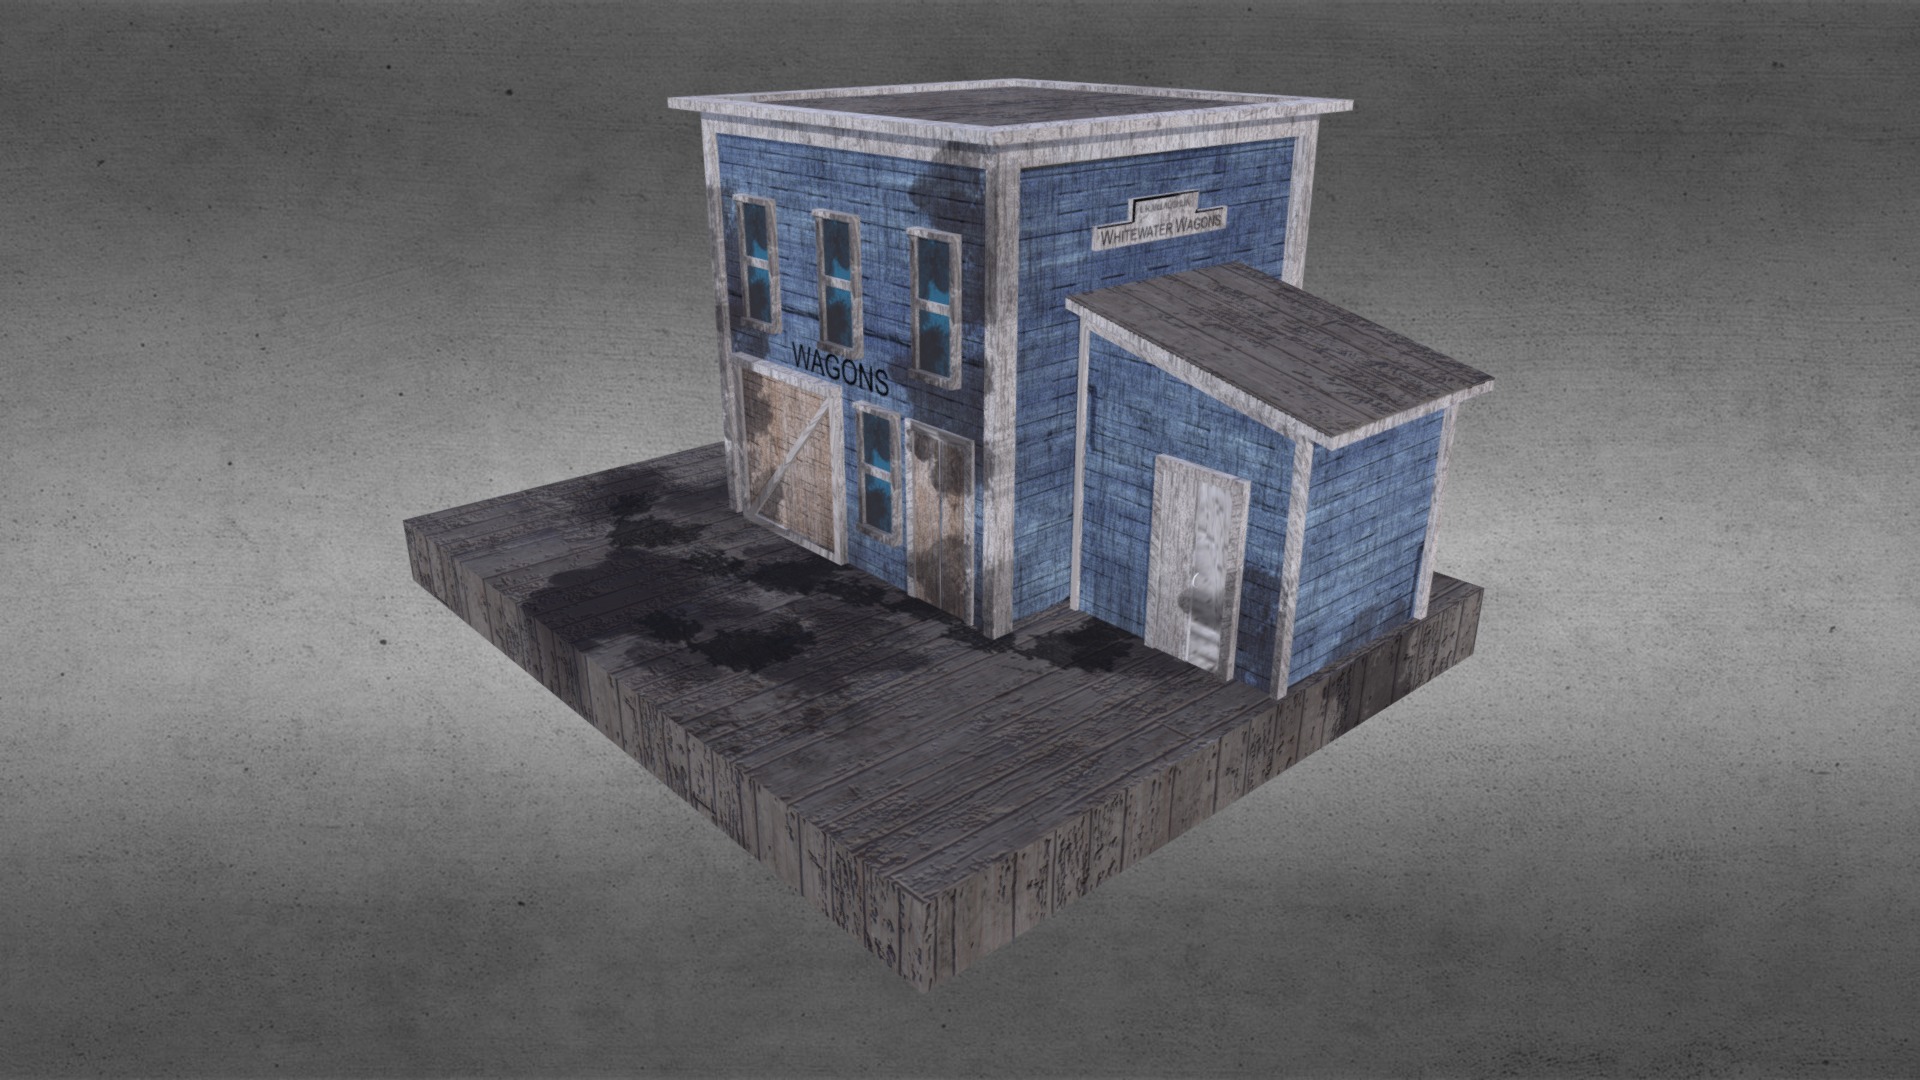 3D model Wagon House from Magnificent Seven Movie - This is a 3D model of the Wagon House from Magnificent Seven Movie. The 3D model is about a small blue house on a wooden platform.